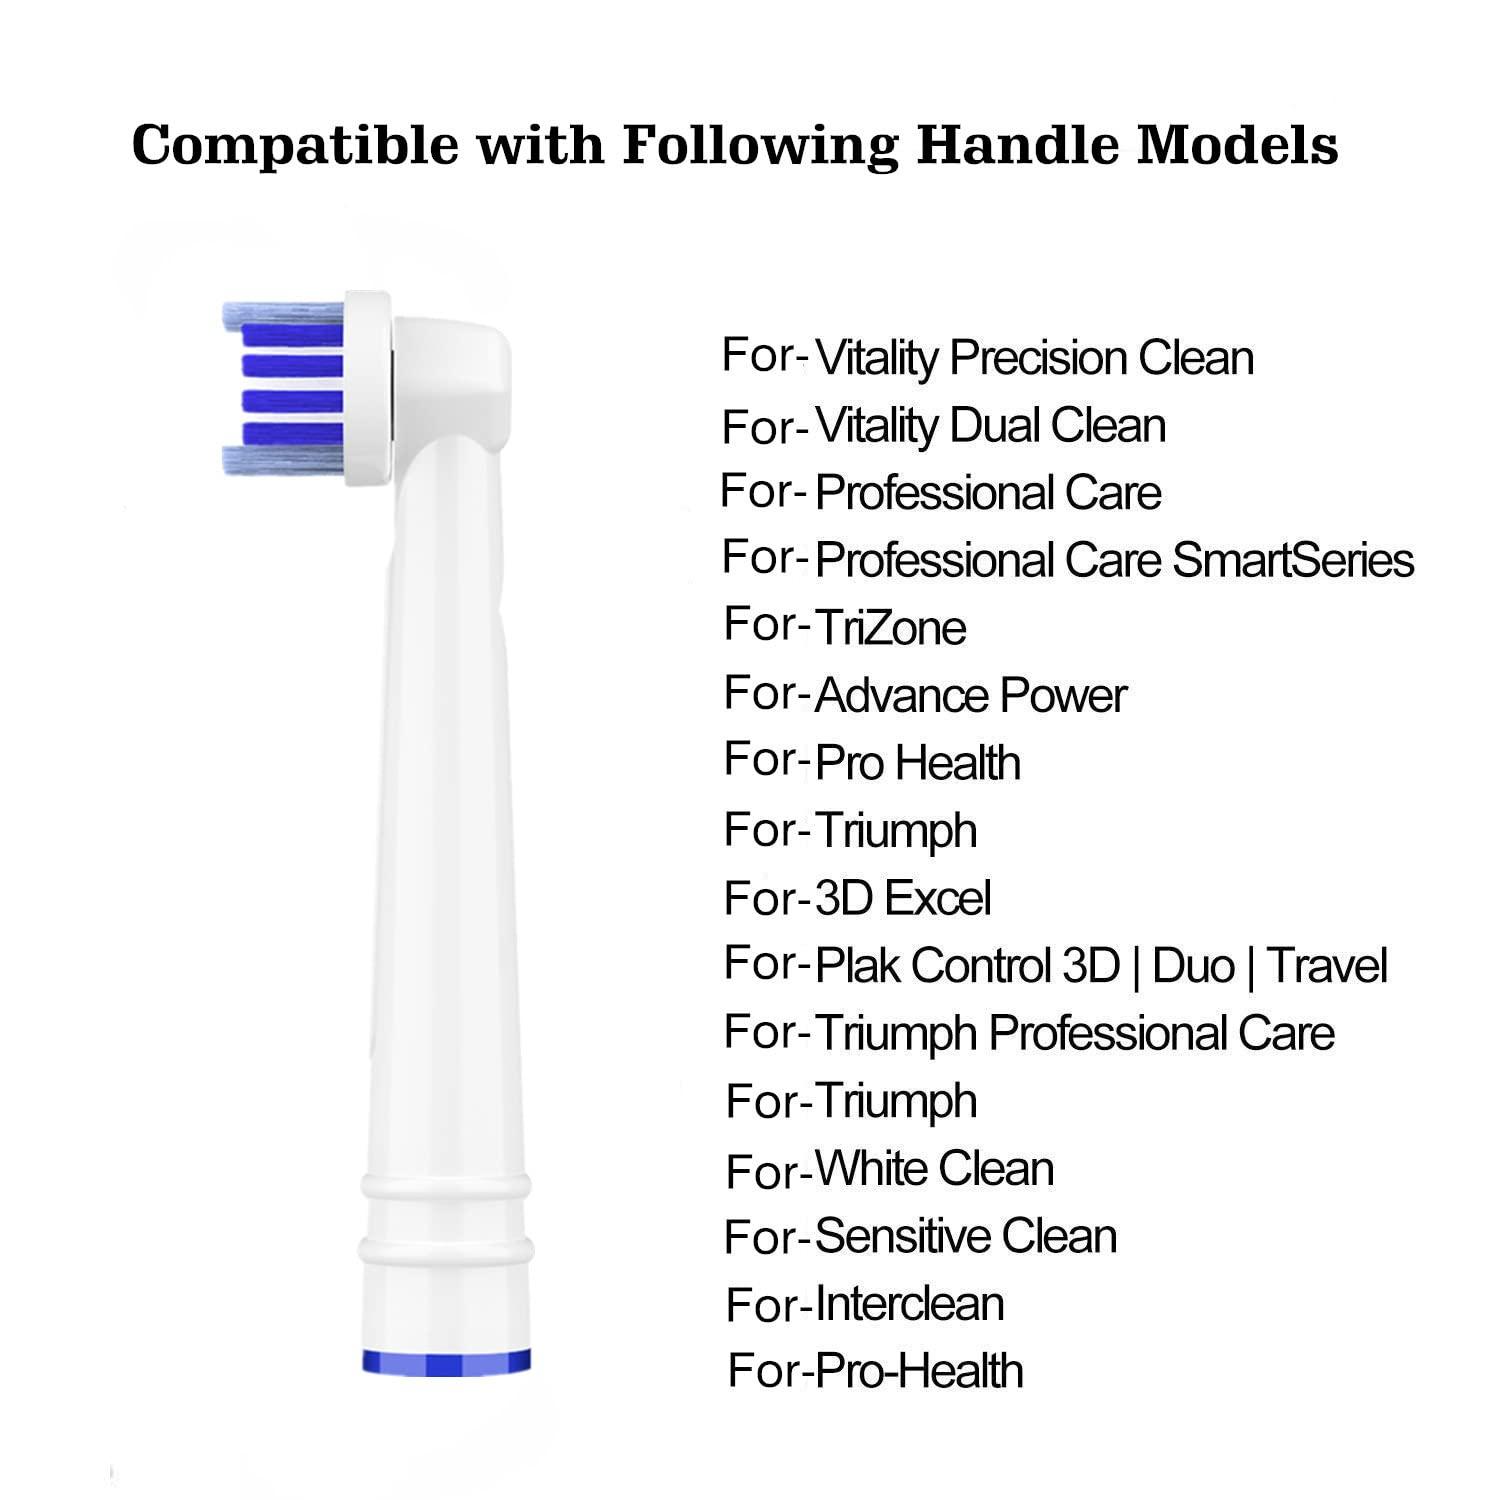 Toothbrush Heads Compatible with Oral Braun,16 Pack Professional Electric Toothbrush Heads Brush Heads for Oral-B 7000/Pro 1000/9600/ 500/3000/8000 1 pack(16 Count)